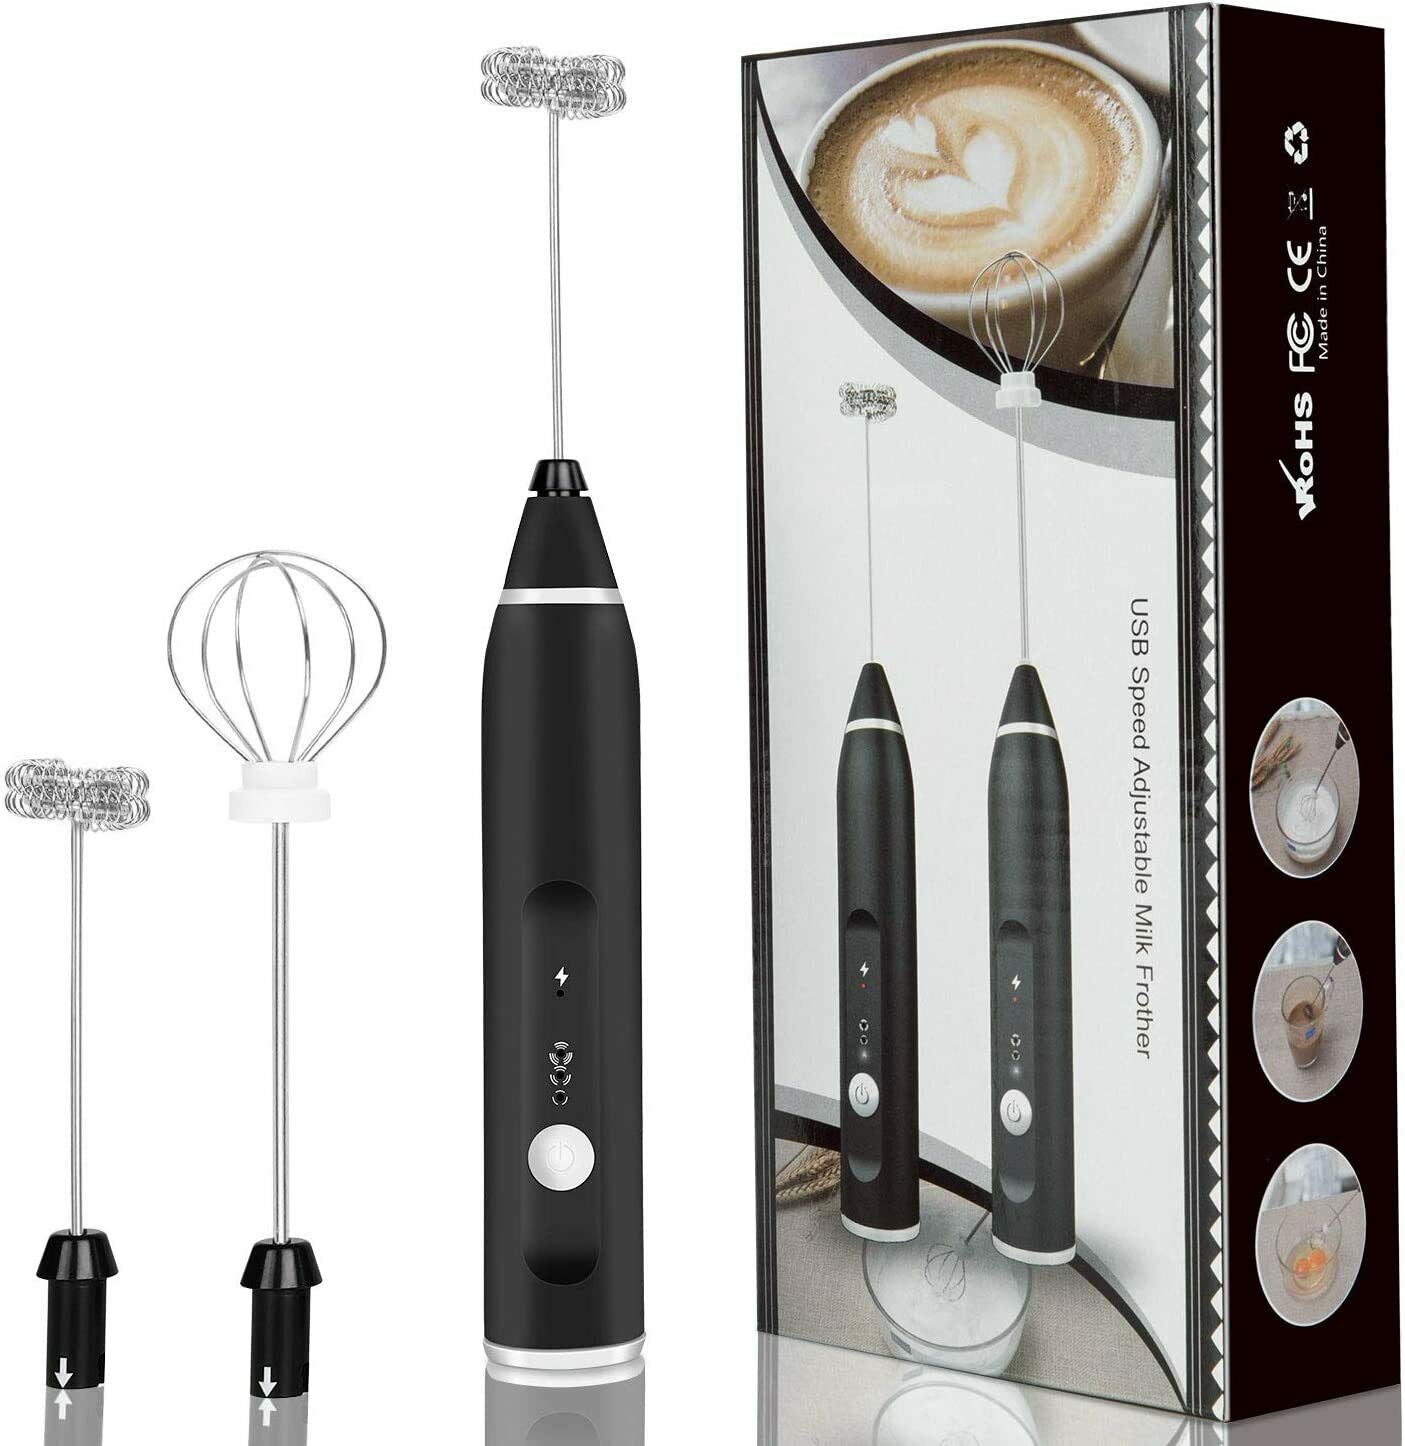 USB Handheld Frother